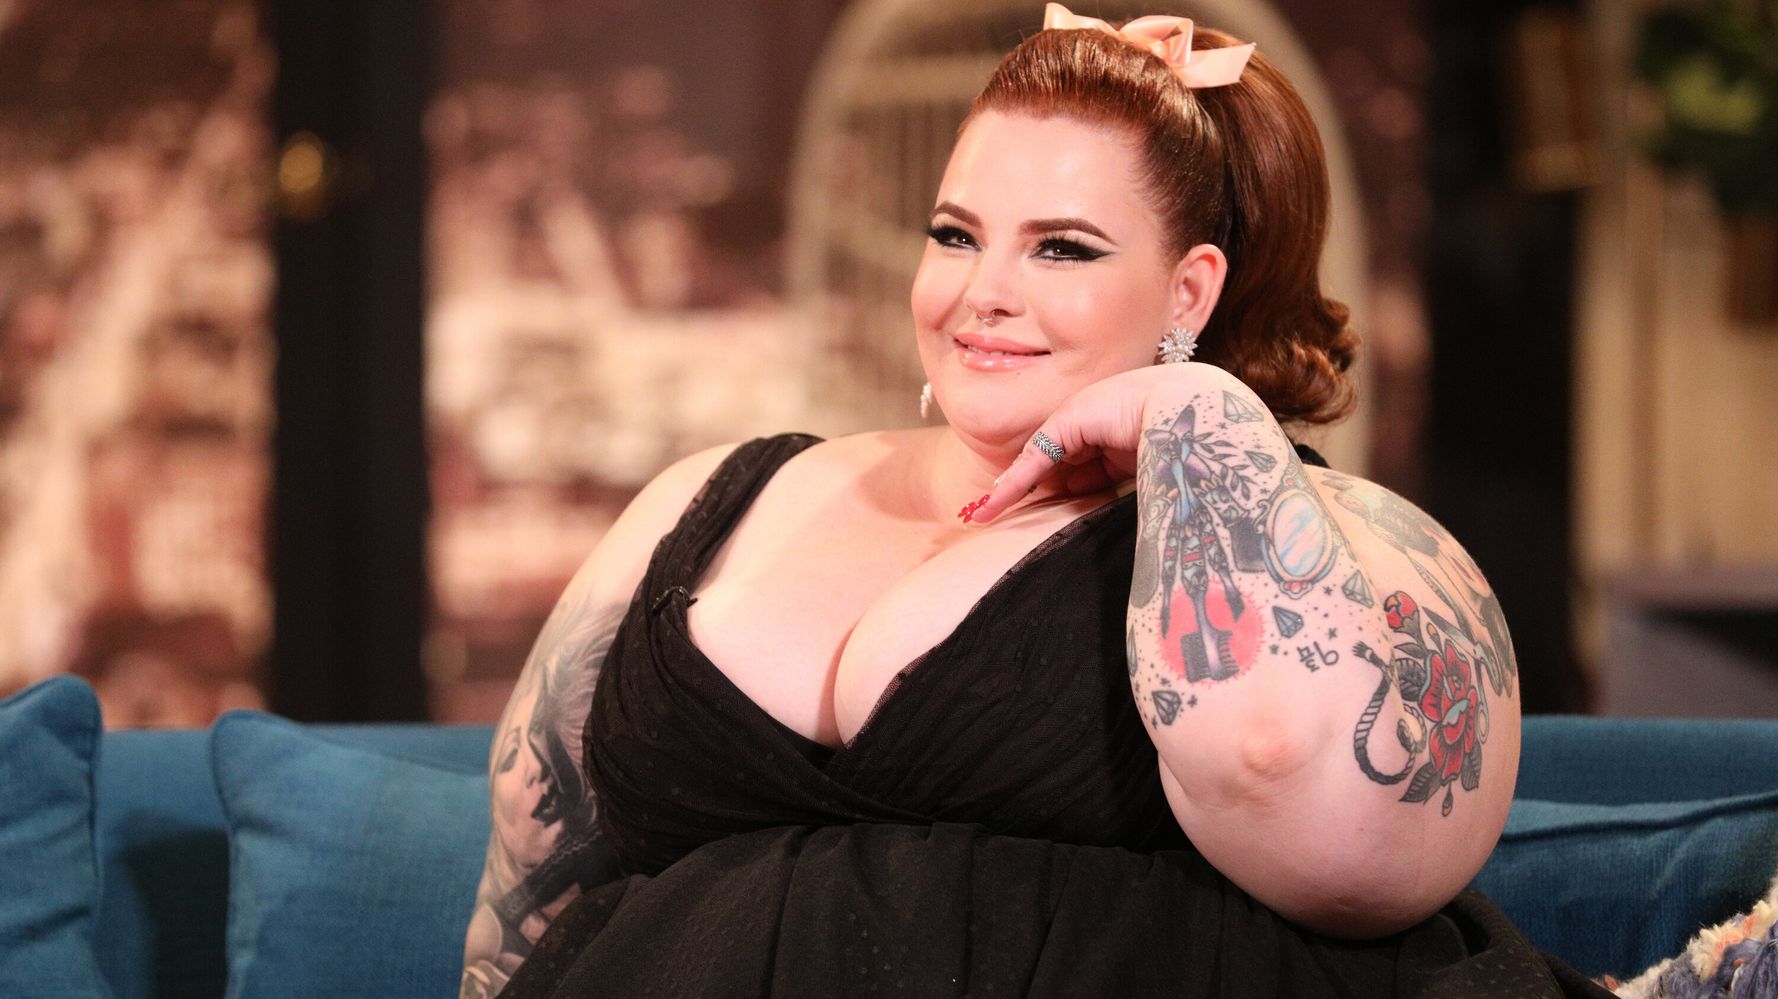 Like Tess Holliday Im Fat And I Just Want To Live My Damn Life